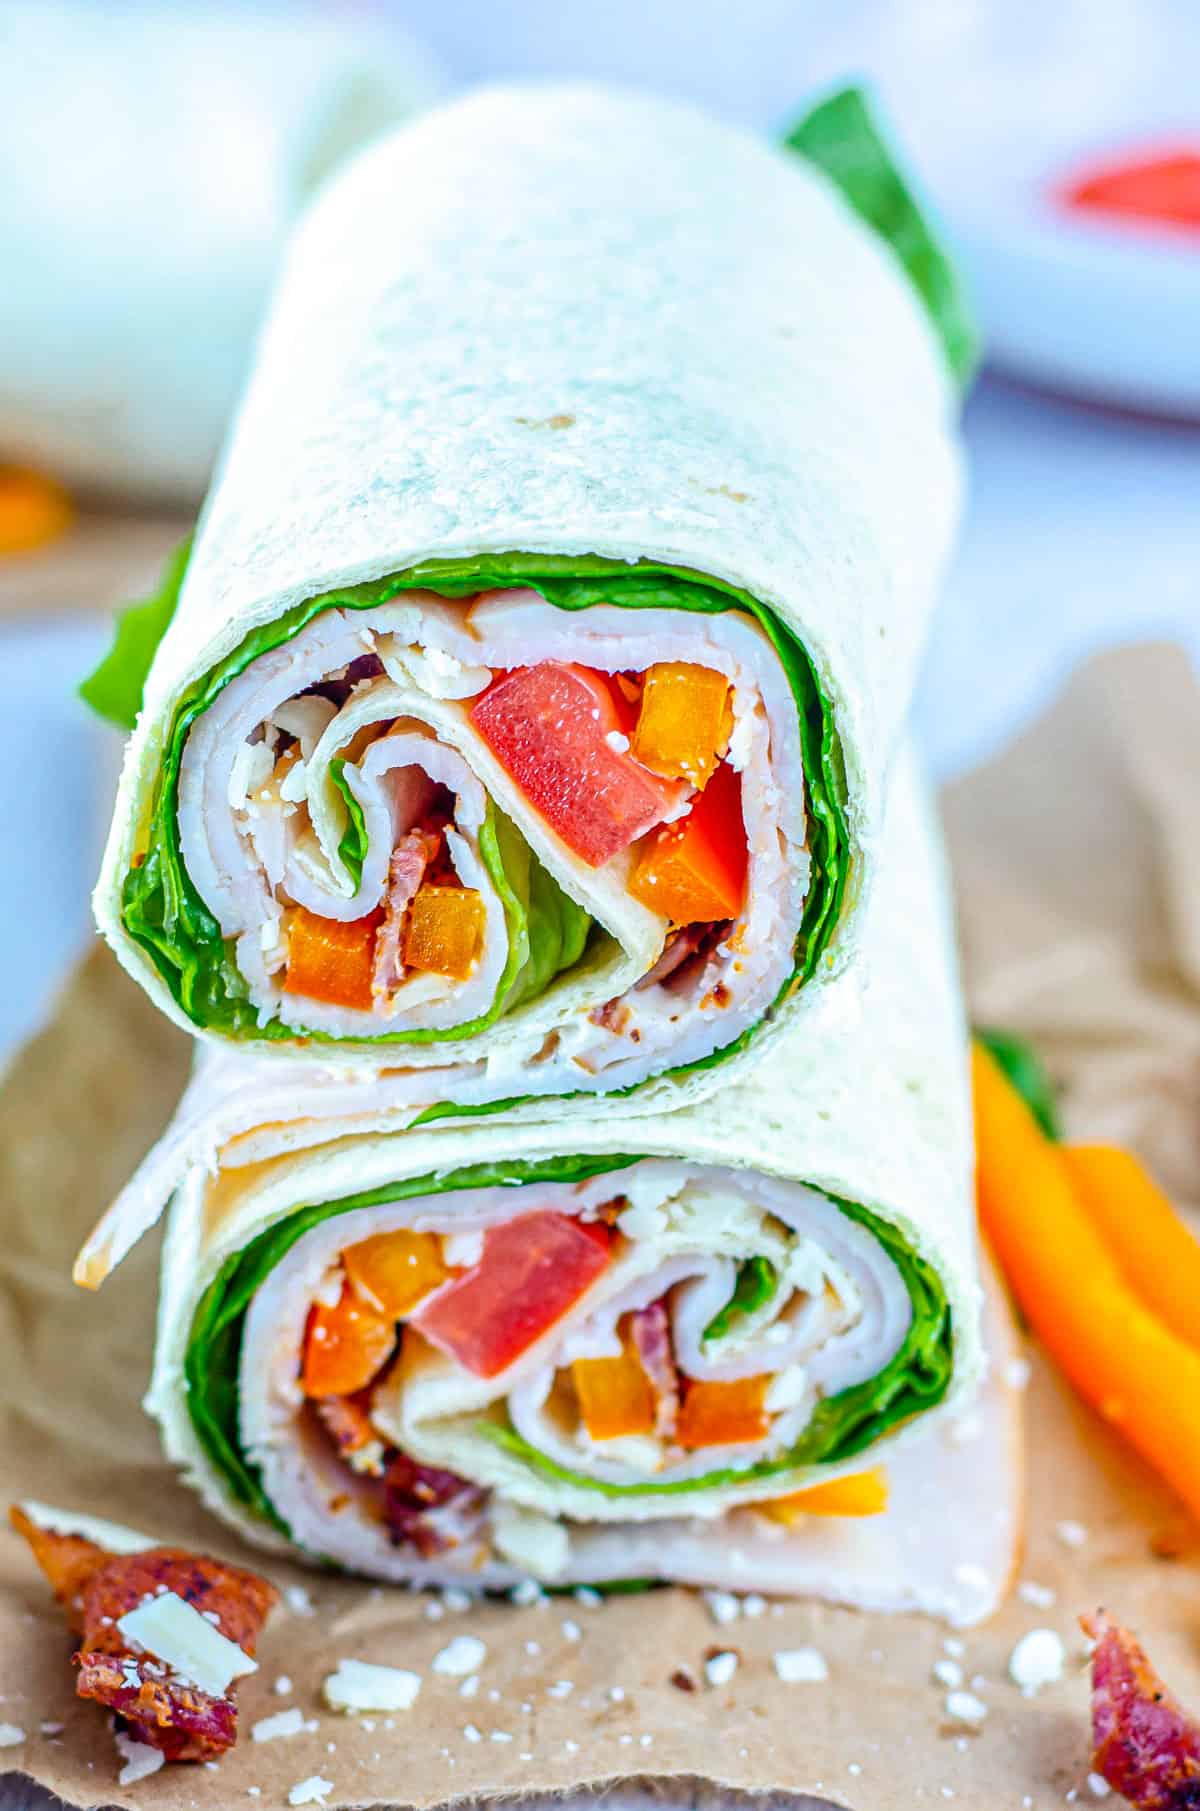 the completed chicken wrap with bacon and ranch served on parchment paper with carrot sticks